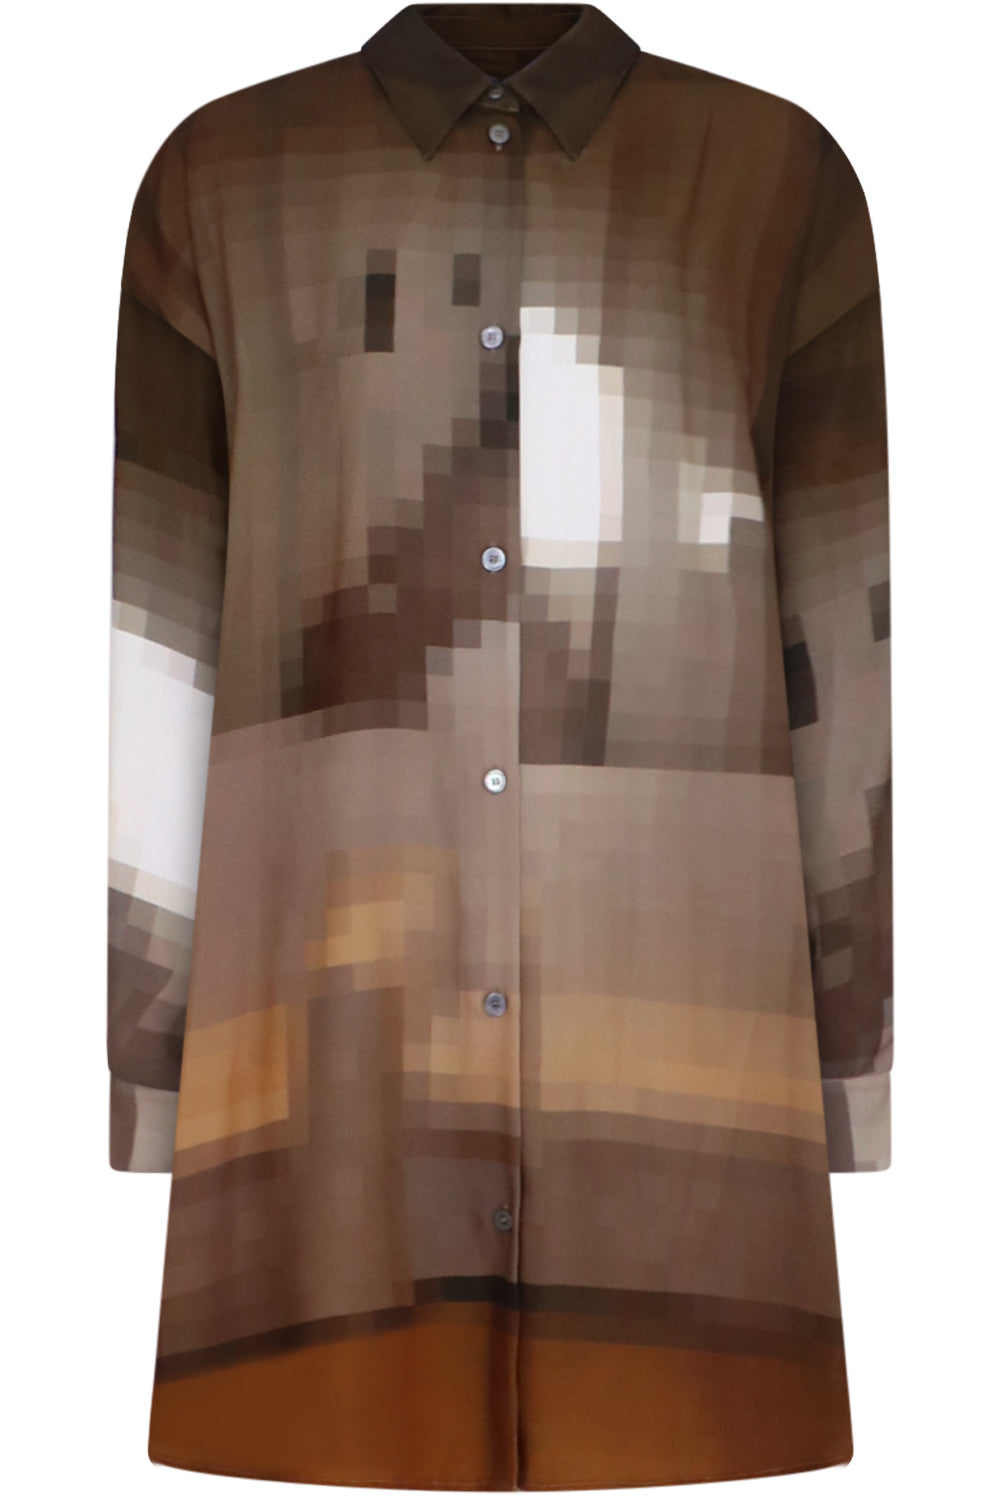 MM6 BY MAISON MARGIELA RTW SHIRT DRESS WITH PIXELATED PRINT | BROWN